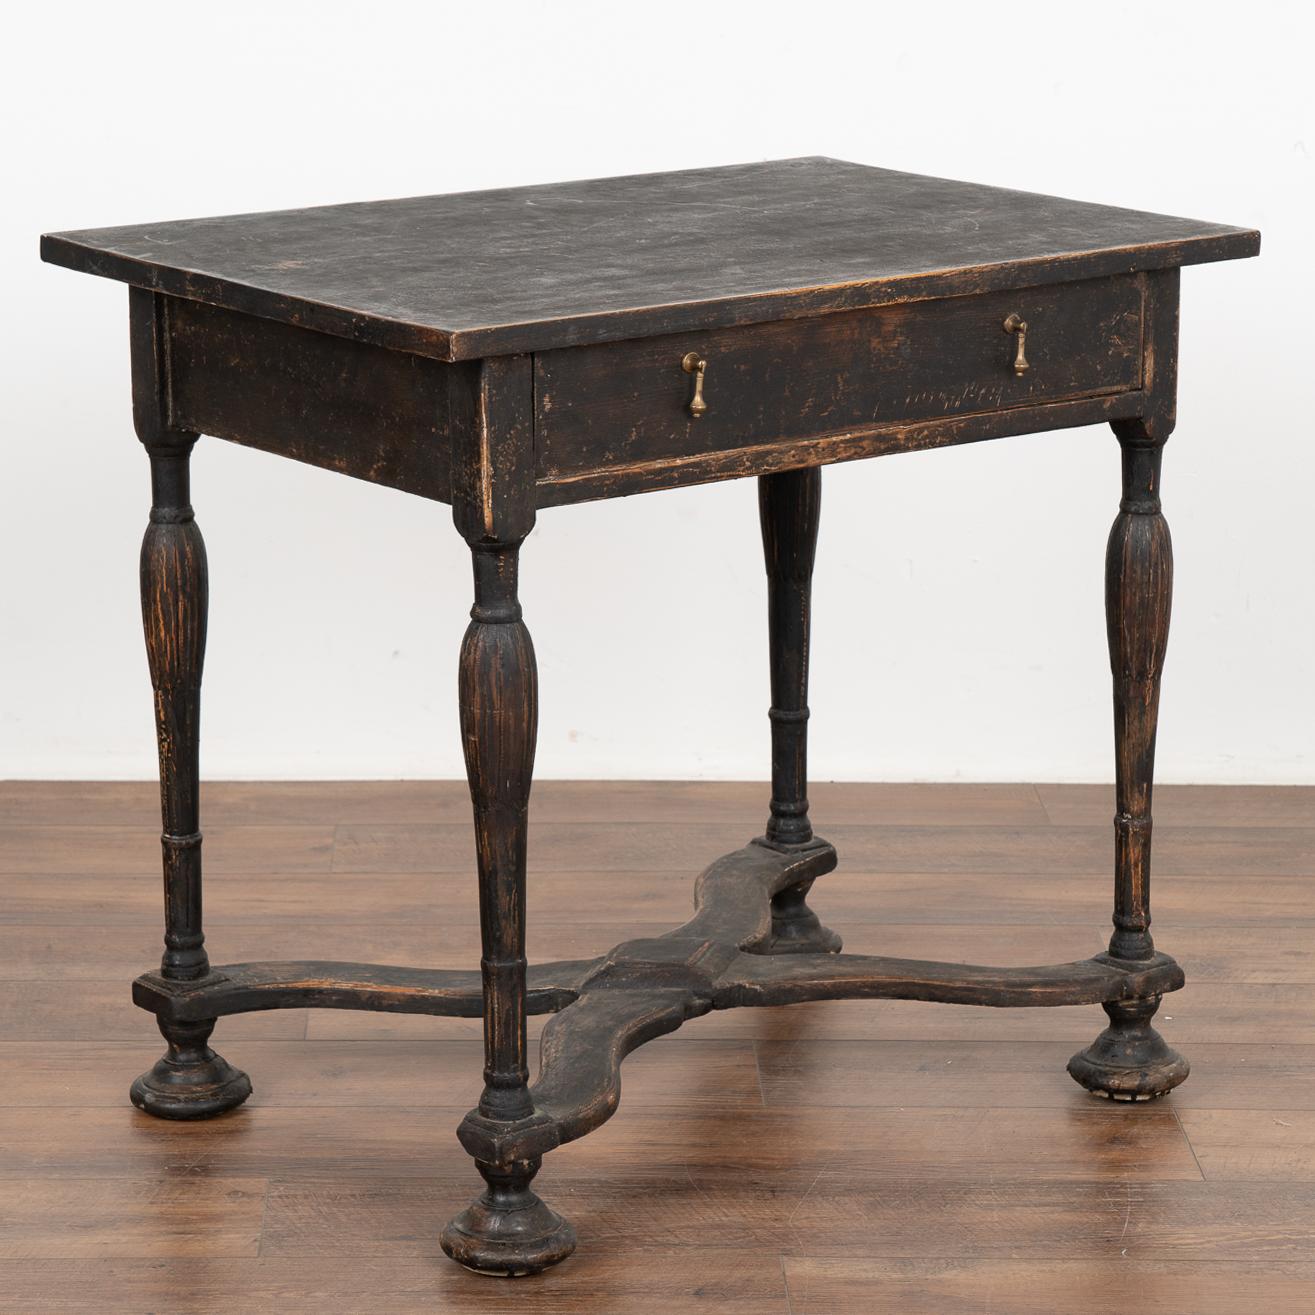 This delightful side table is a wonderful example of Swedish country craftsmanship of the early 1800's. The turned legs with X stretcher base resting on bun feet are traditional style elements while a single drawer with double pulls adds function as